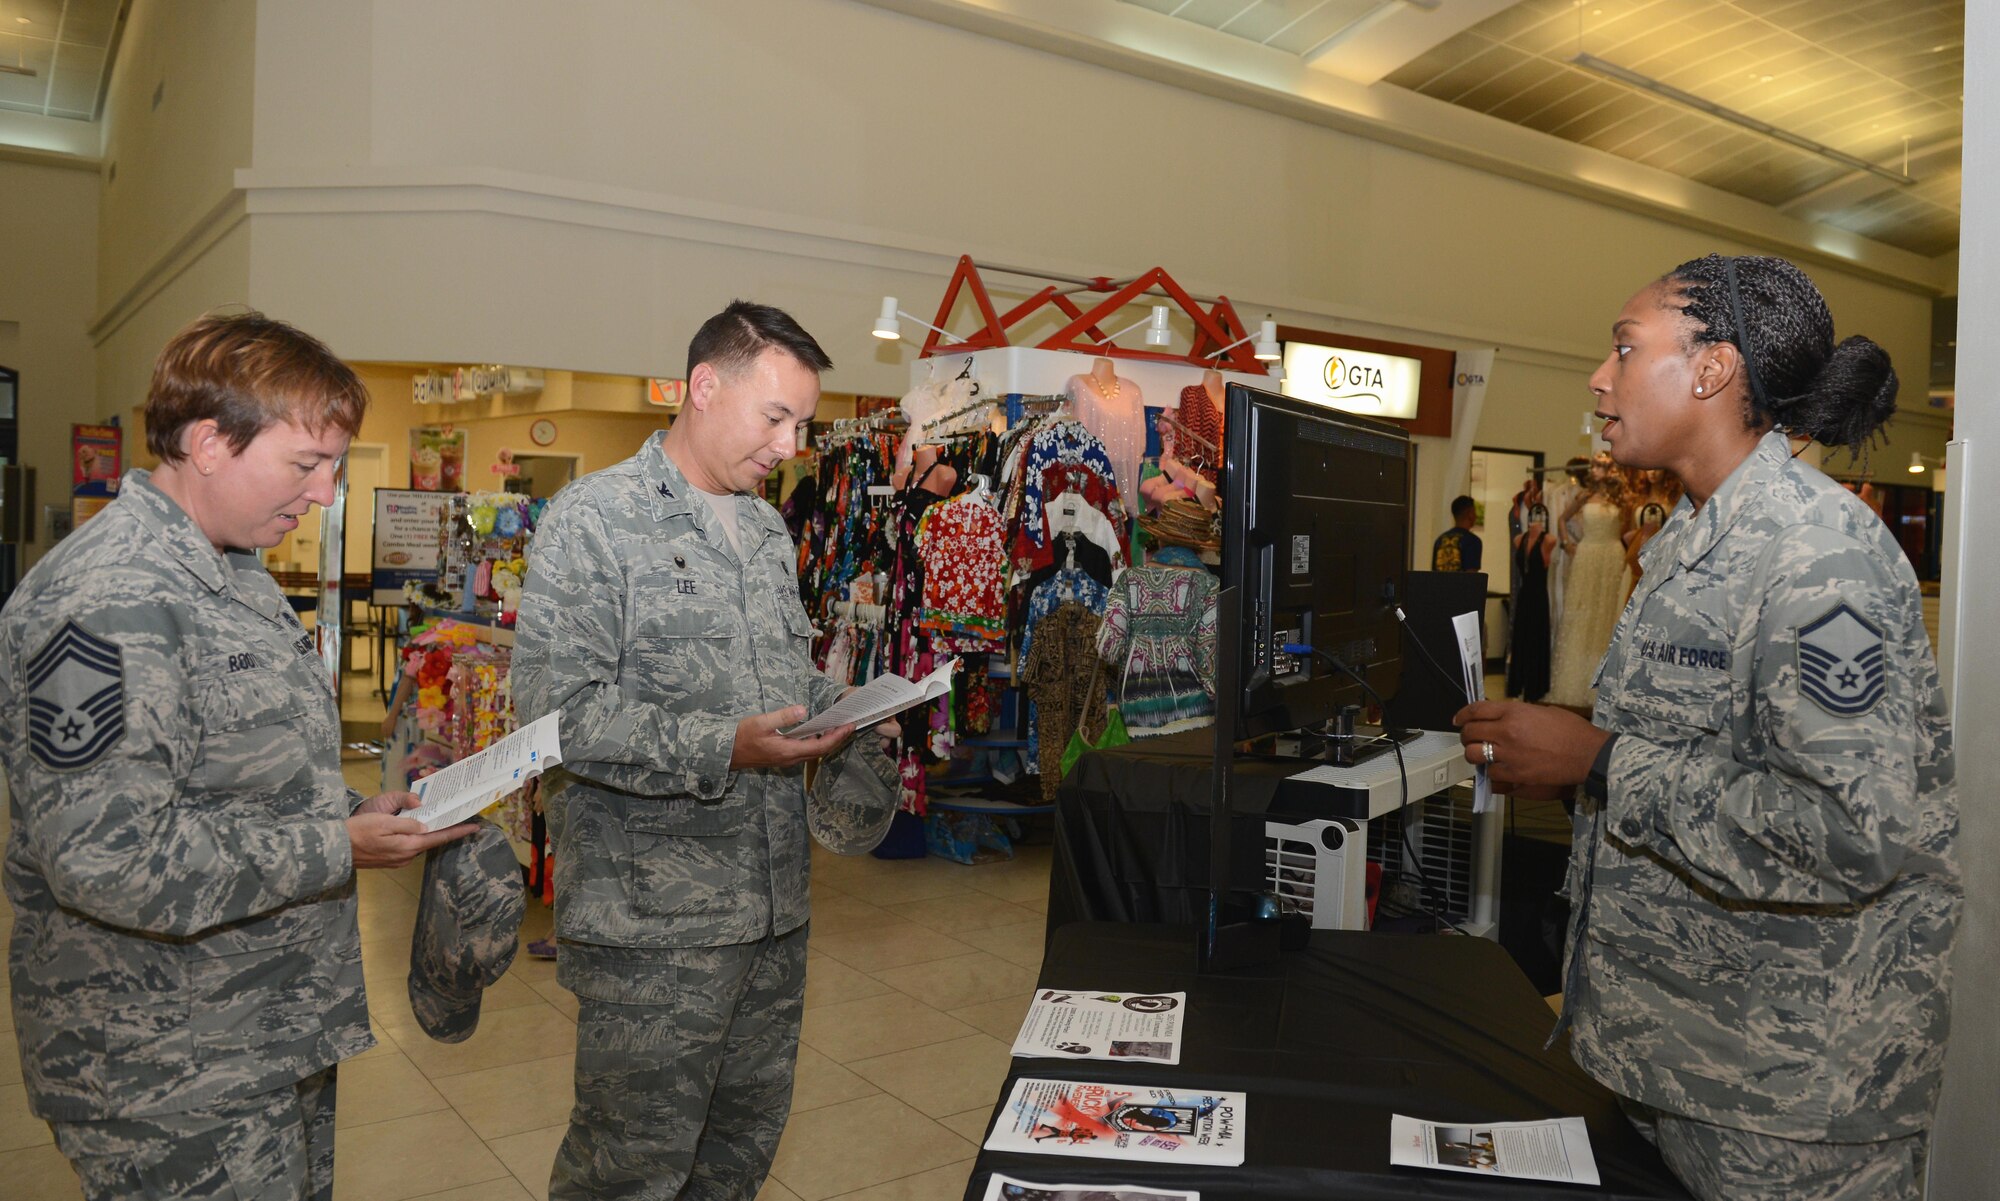 Master Sgt. Rahsha Mitchell, 36th Logistics Readiness Squadron POW/MIA volunteer, informs Col. Daniel Lee (middle), 36th Medical Group commander, and Chief Master Sgt. Michelle Rootes (left), 36th MDG superintendent, Sept. 15, 2015, about the POW/MIA Remembrance Week events at Andersen Air Force Base, Guam. A number of events are scheduled this week including a 5K run, ruck march, golf tournament, vigil run and a retreat ceremony. (U.S. Air Force photo by Airman 1st Class Arielle Vasquez/Released)